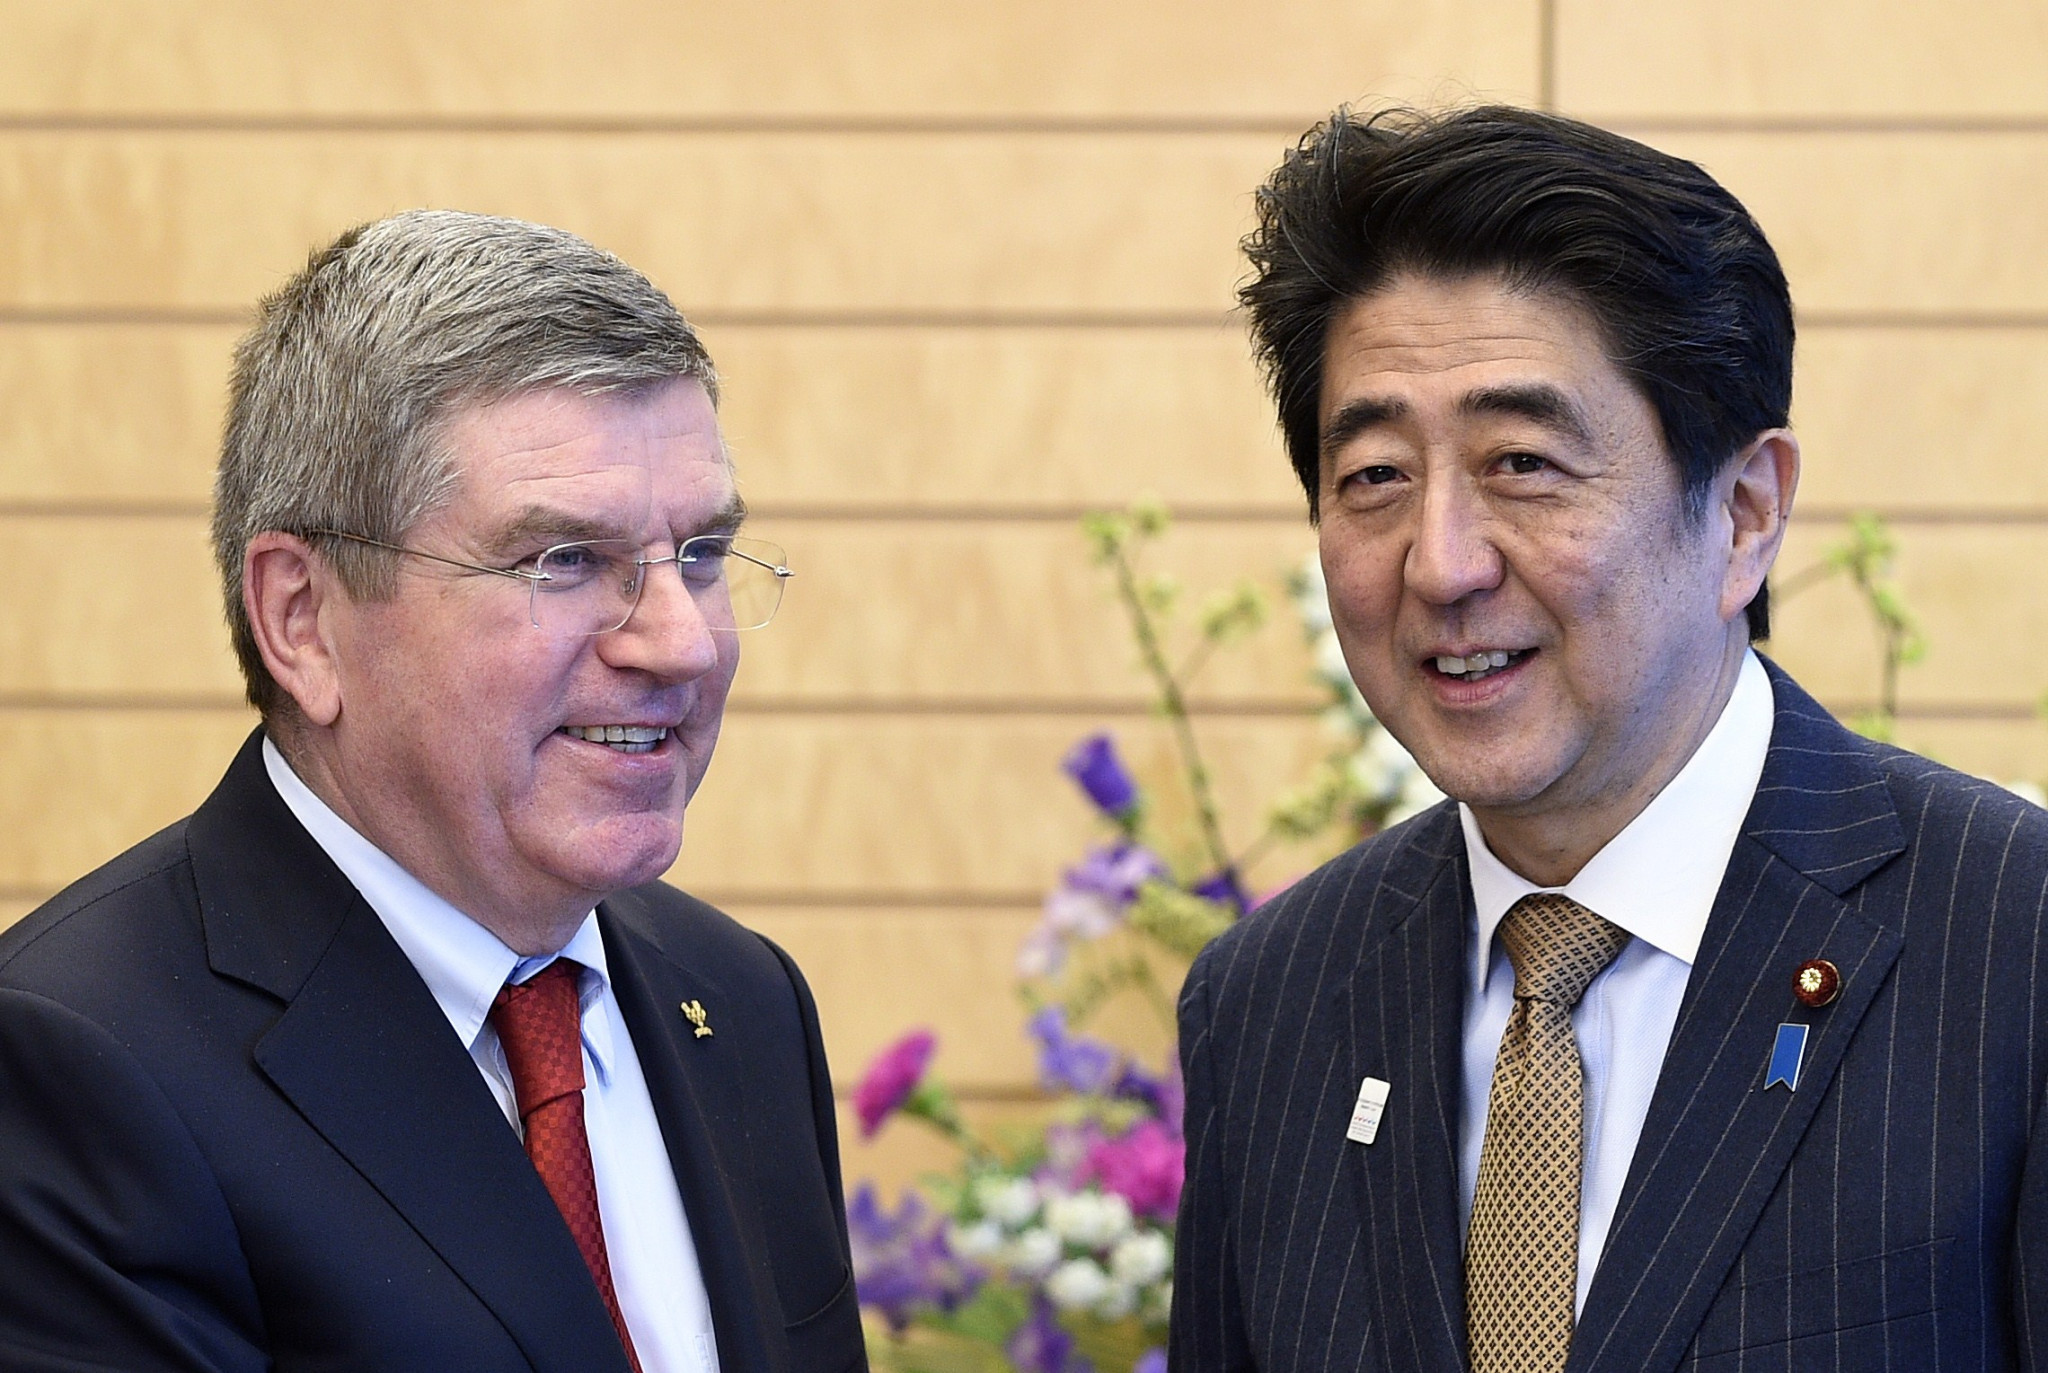 Thomas Bach, left, meeting with Shinzo Abe in 2015 ©Getty Images